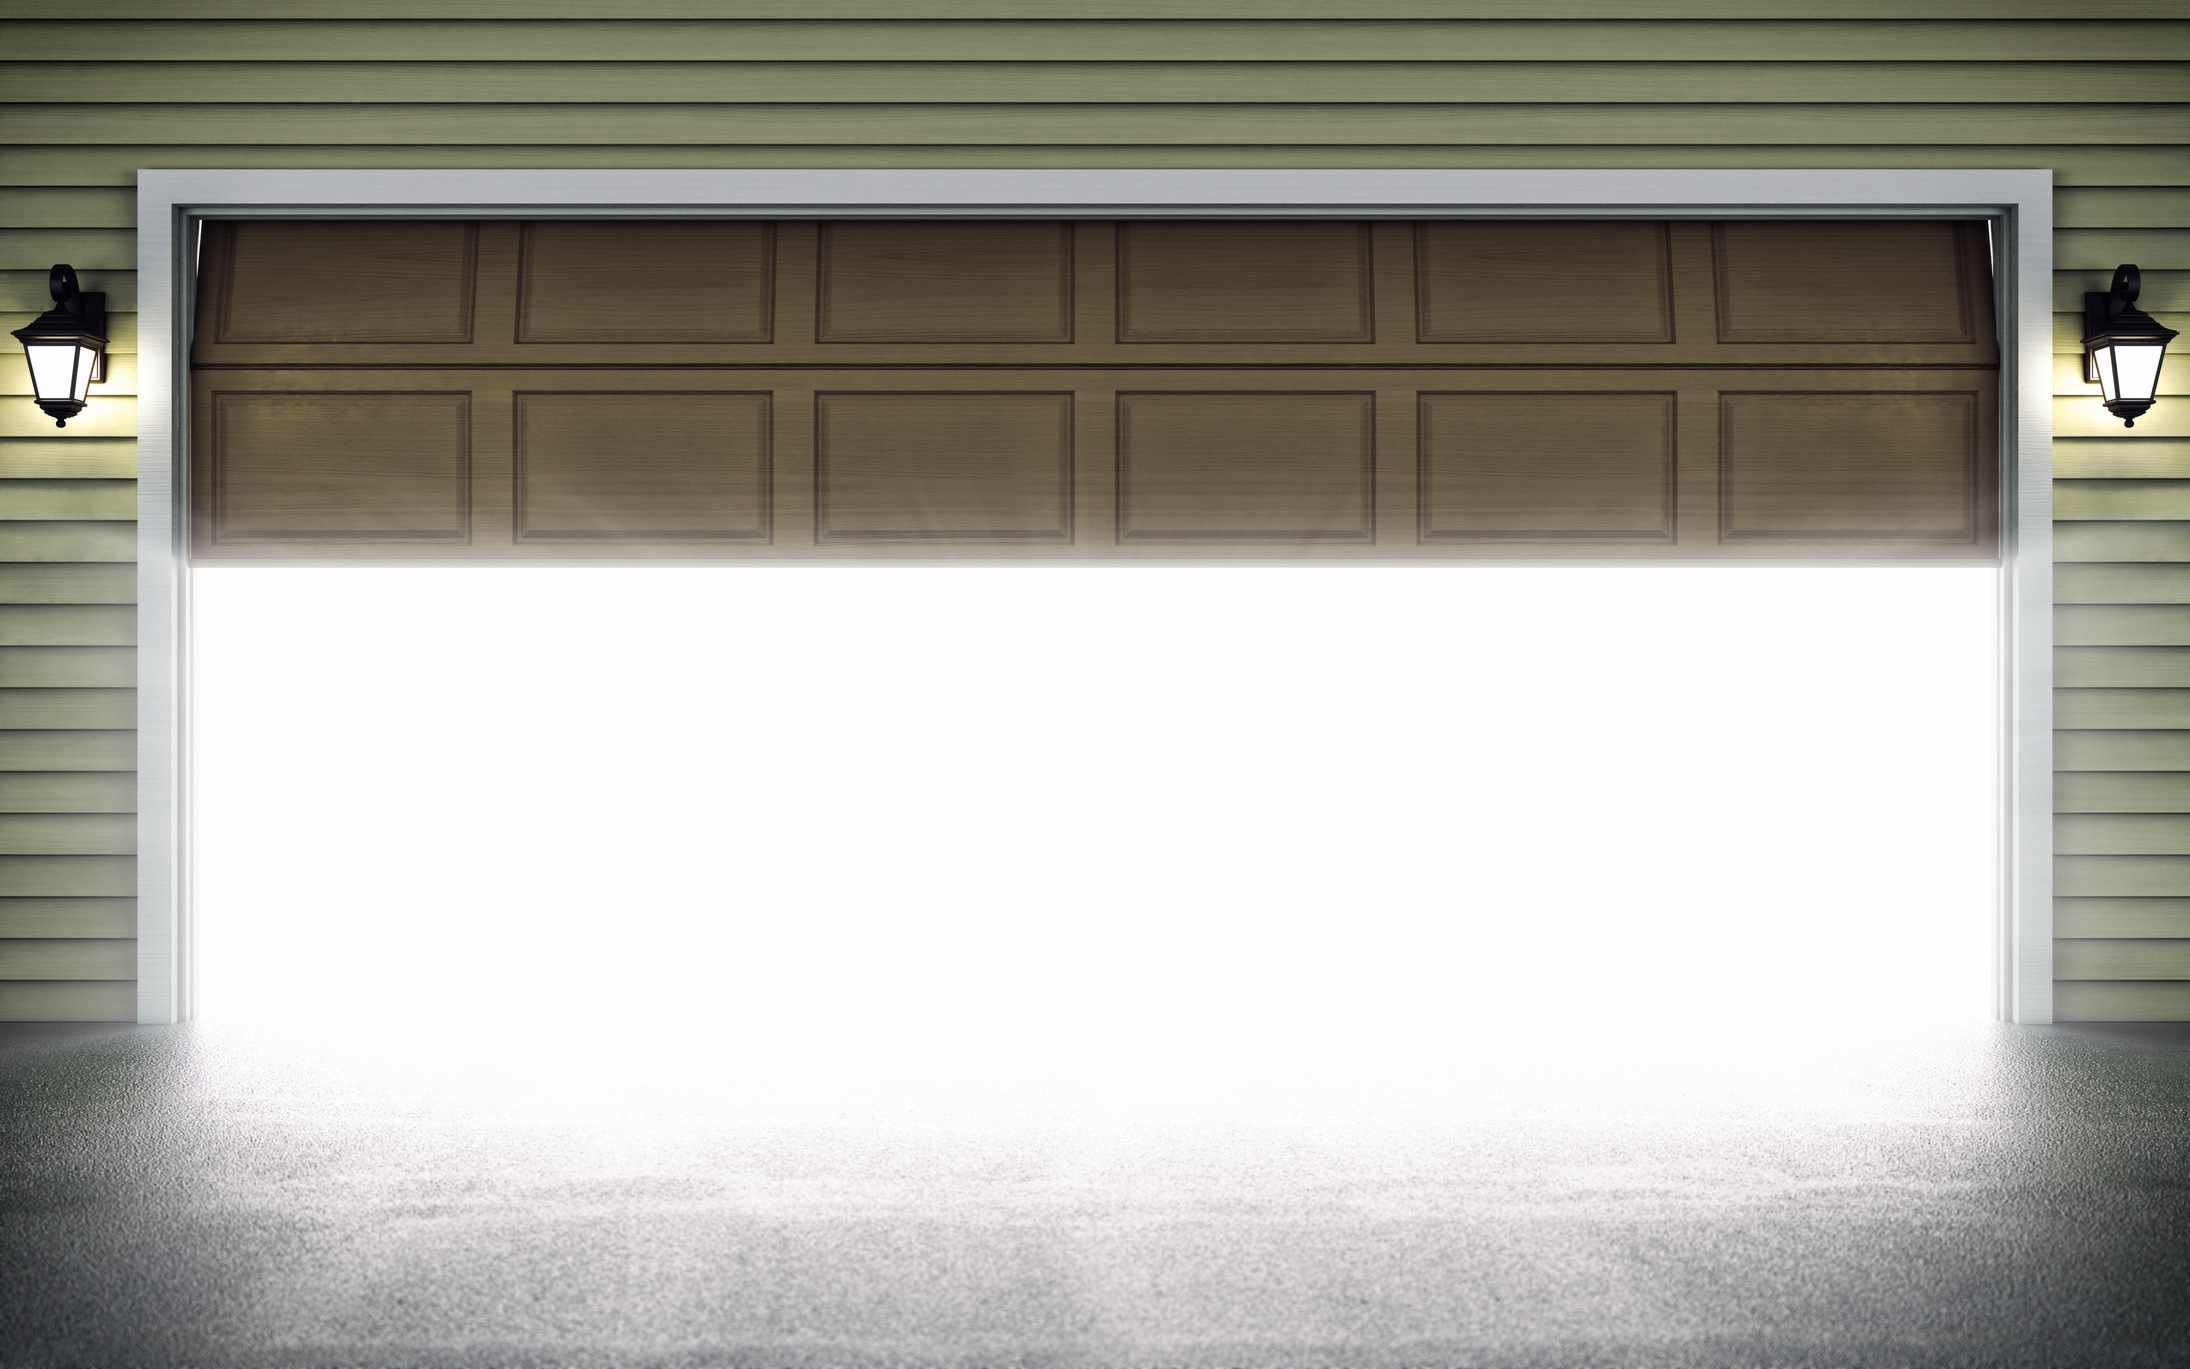 Chamberlain Garage Door Opening and Closing By Itself – What You Need to Know